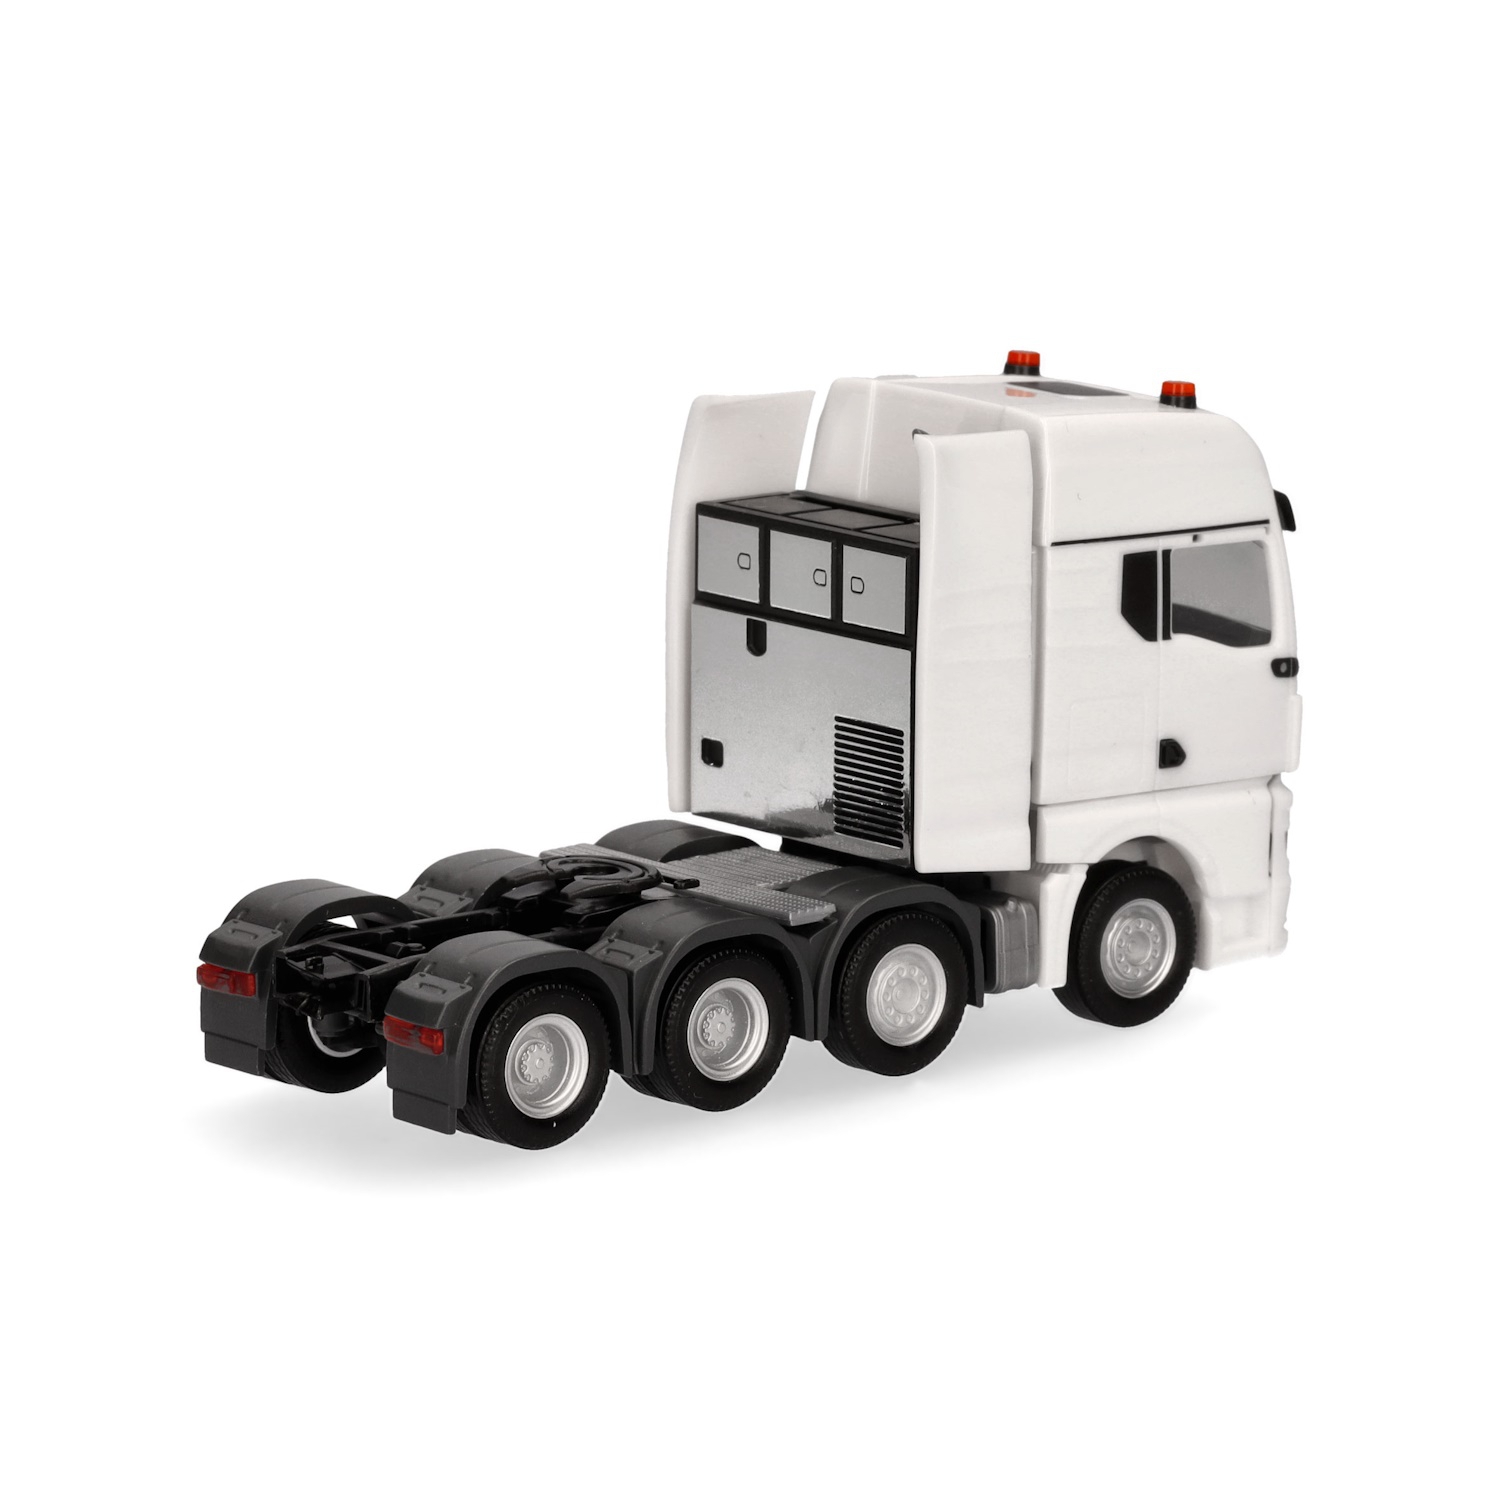 316958 - Herpa - MAN TGX GX 37.580 heavy load tractor 8x4 with air ride,  white